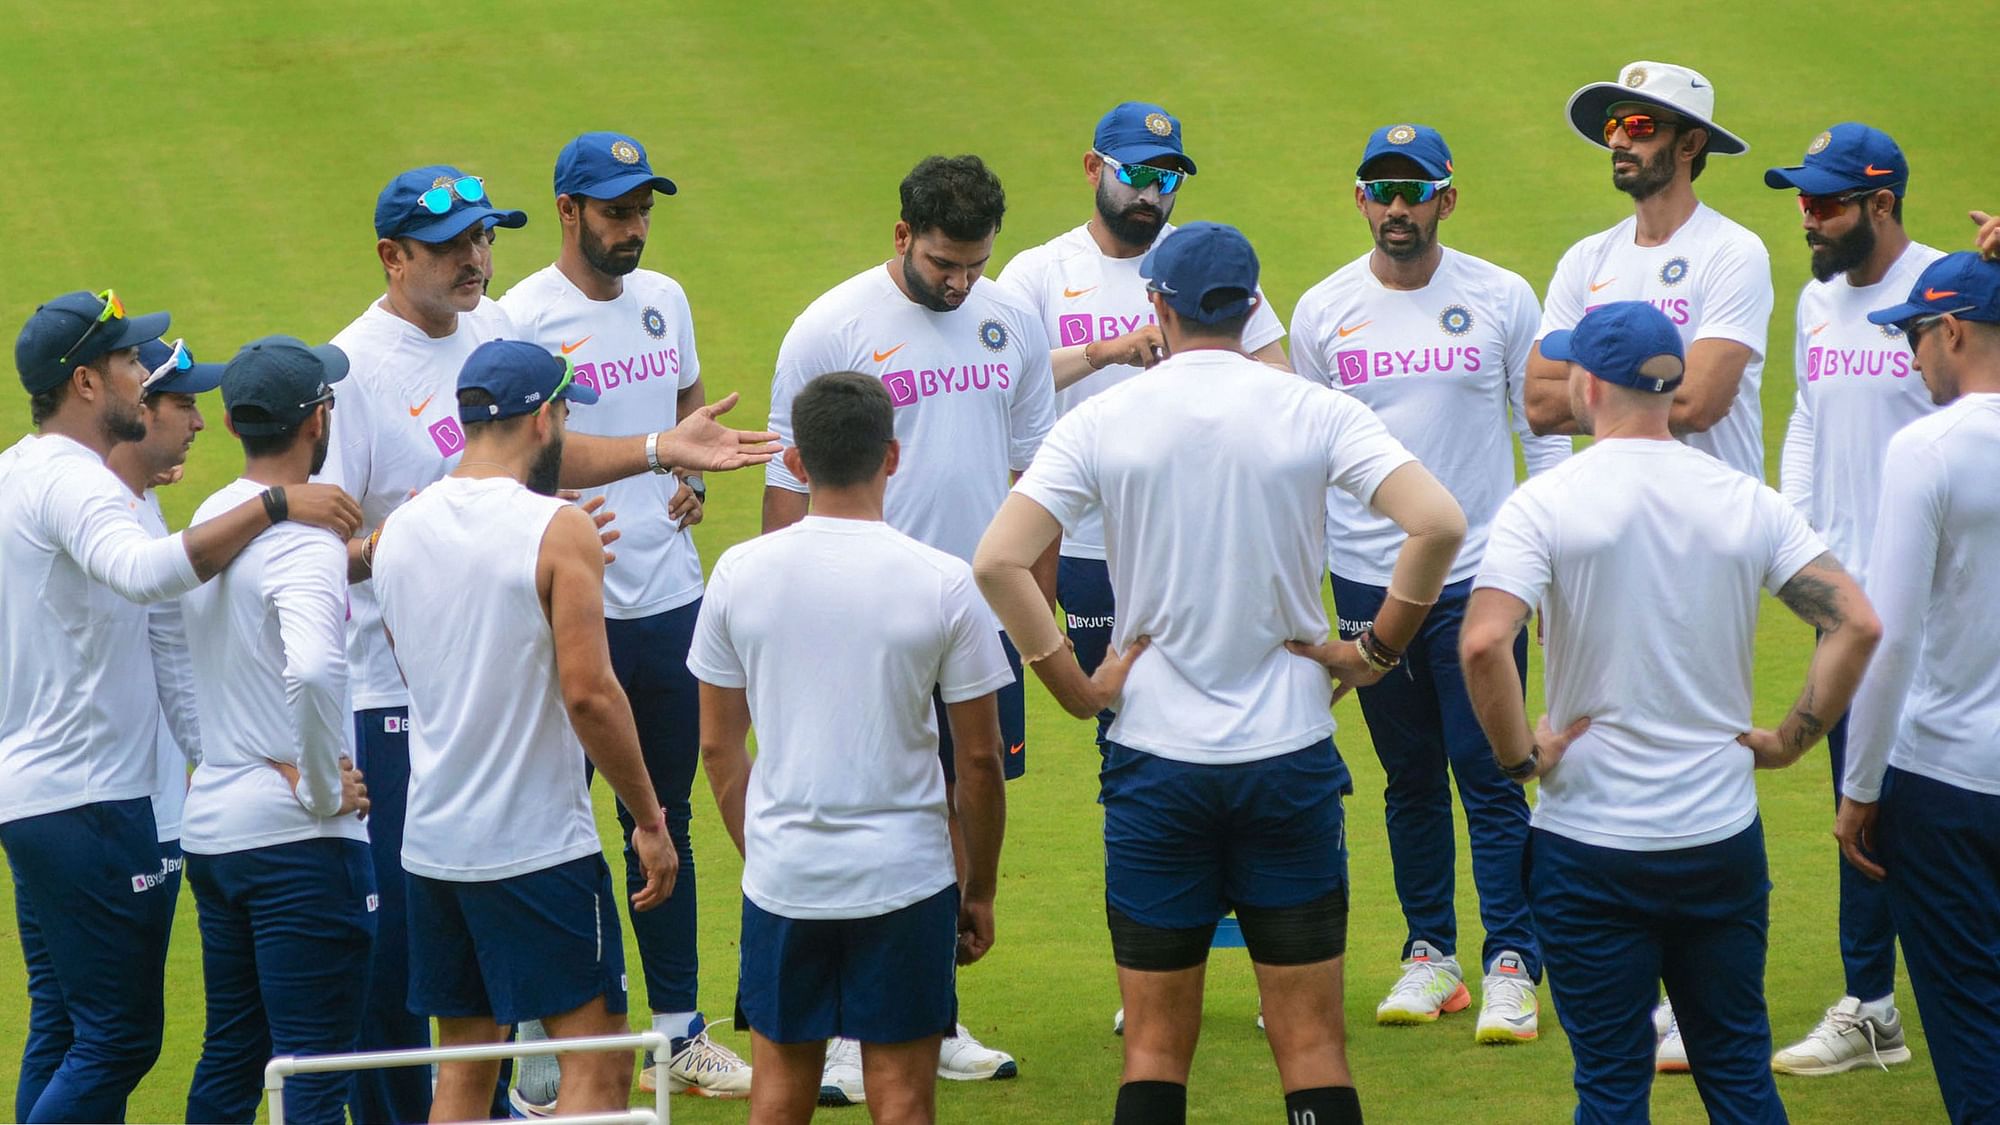 India vs South Africa Match: The Indian cricket team take on South Africa in the first Test of the three-match series at Visakhapatnam starting 2 October.